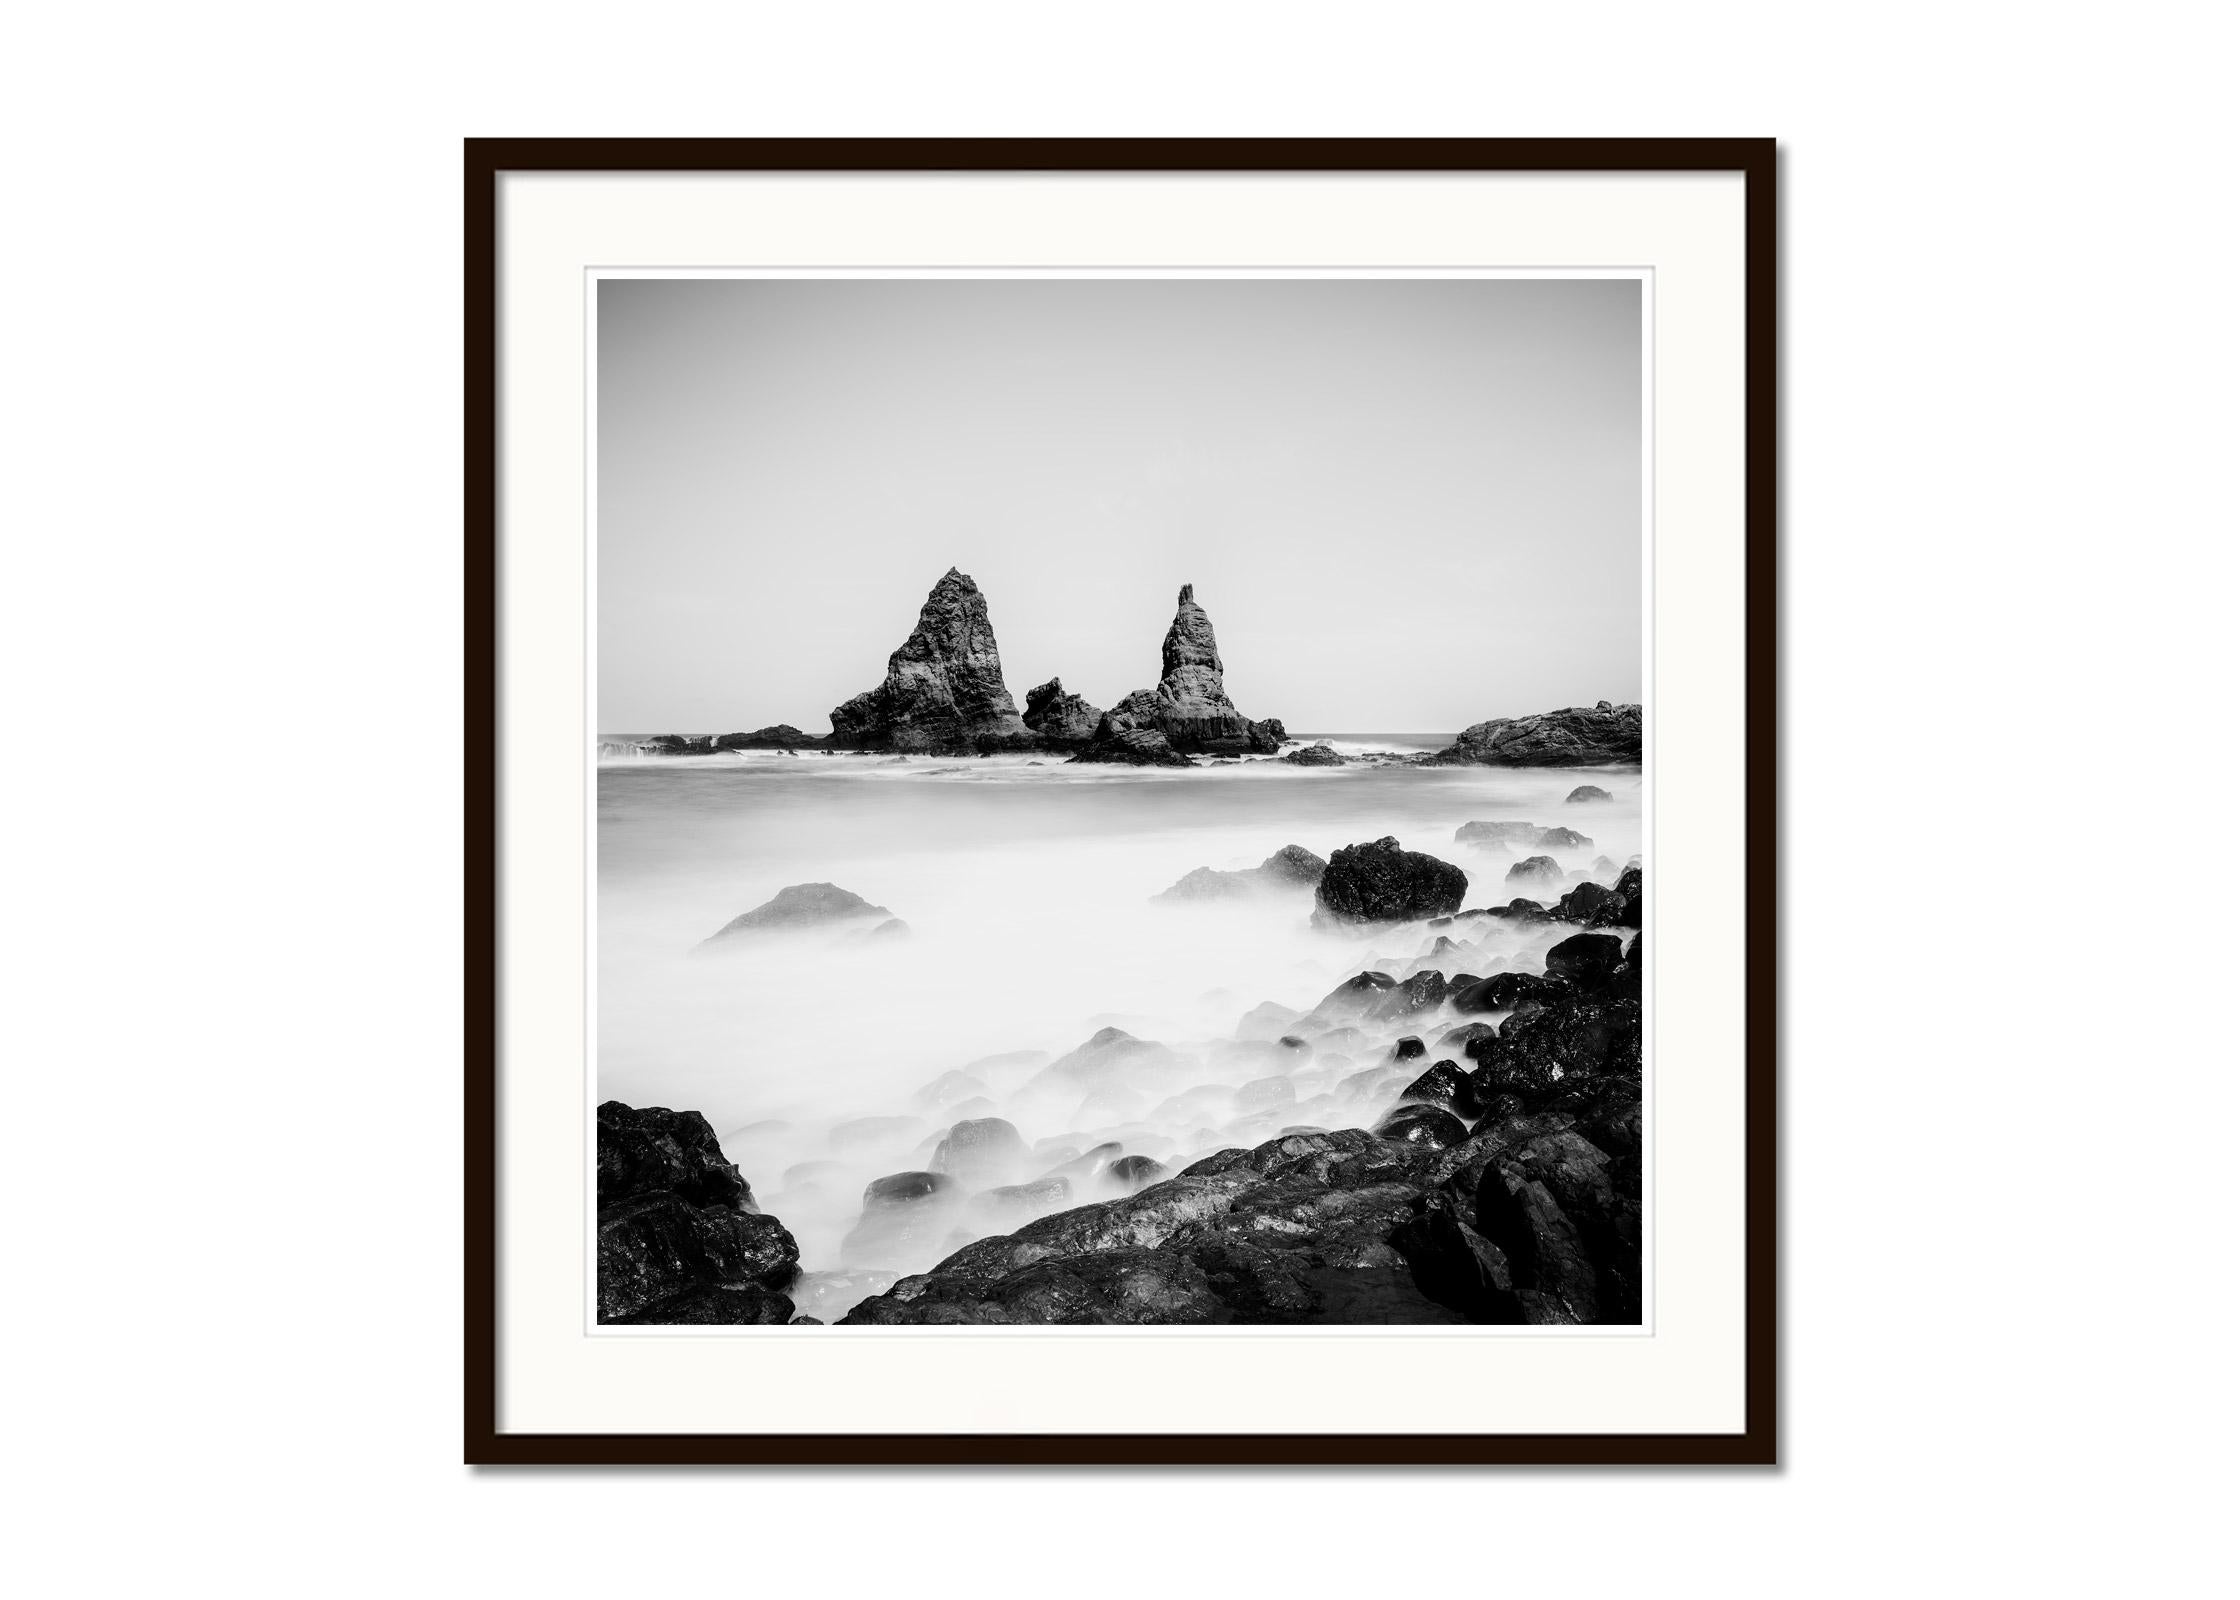 Roques de Arguamul Rocks, Spain, black and white, long exposure landscape photo - Gray Black and White Photograph by Gerald Berghammer